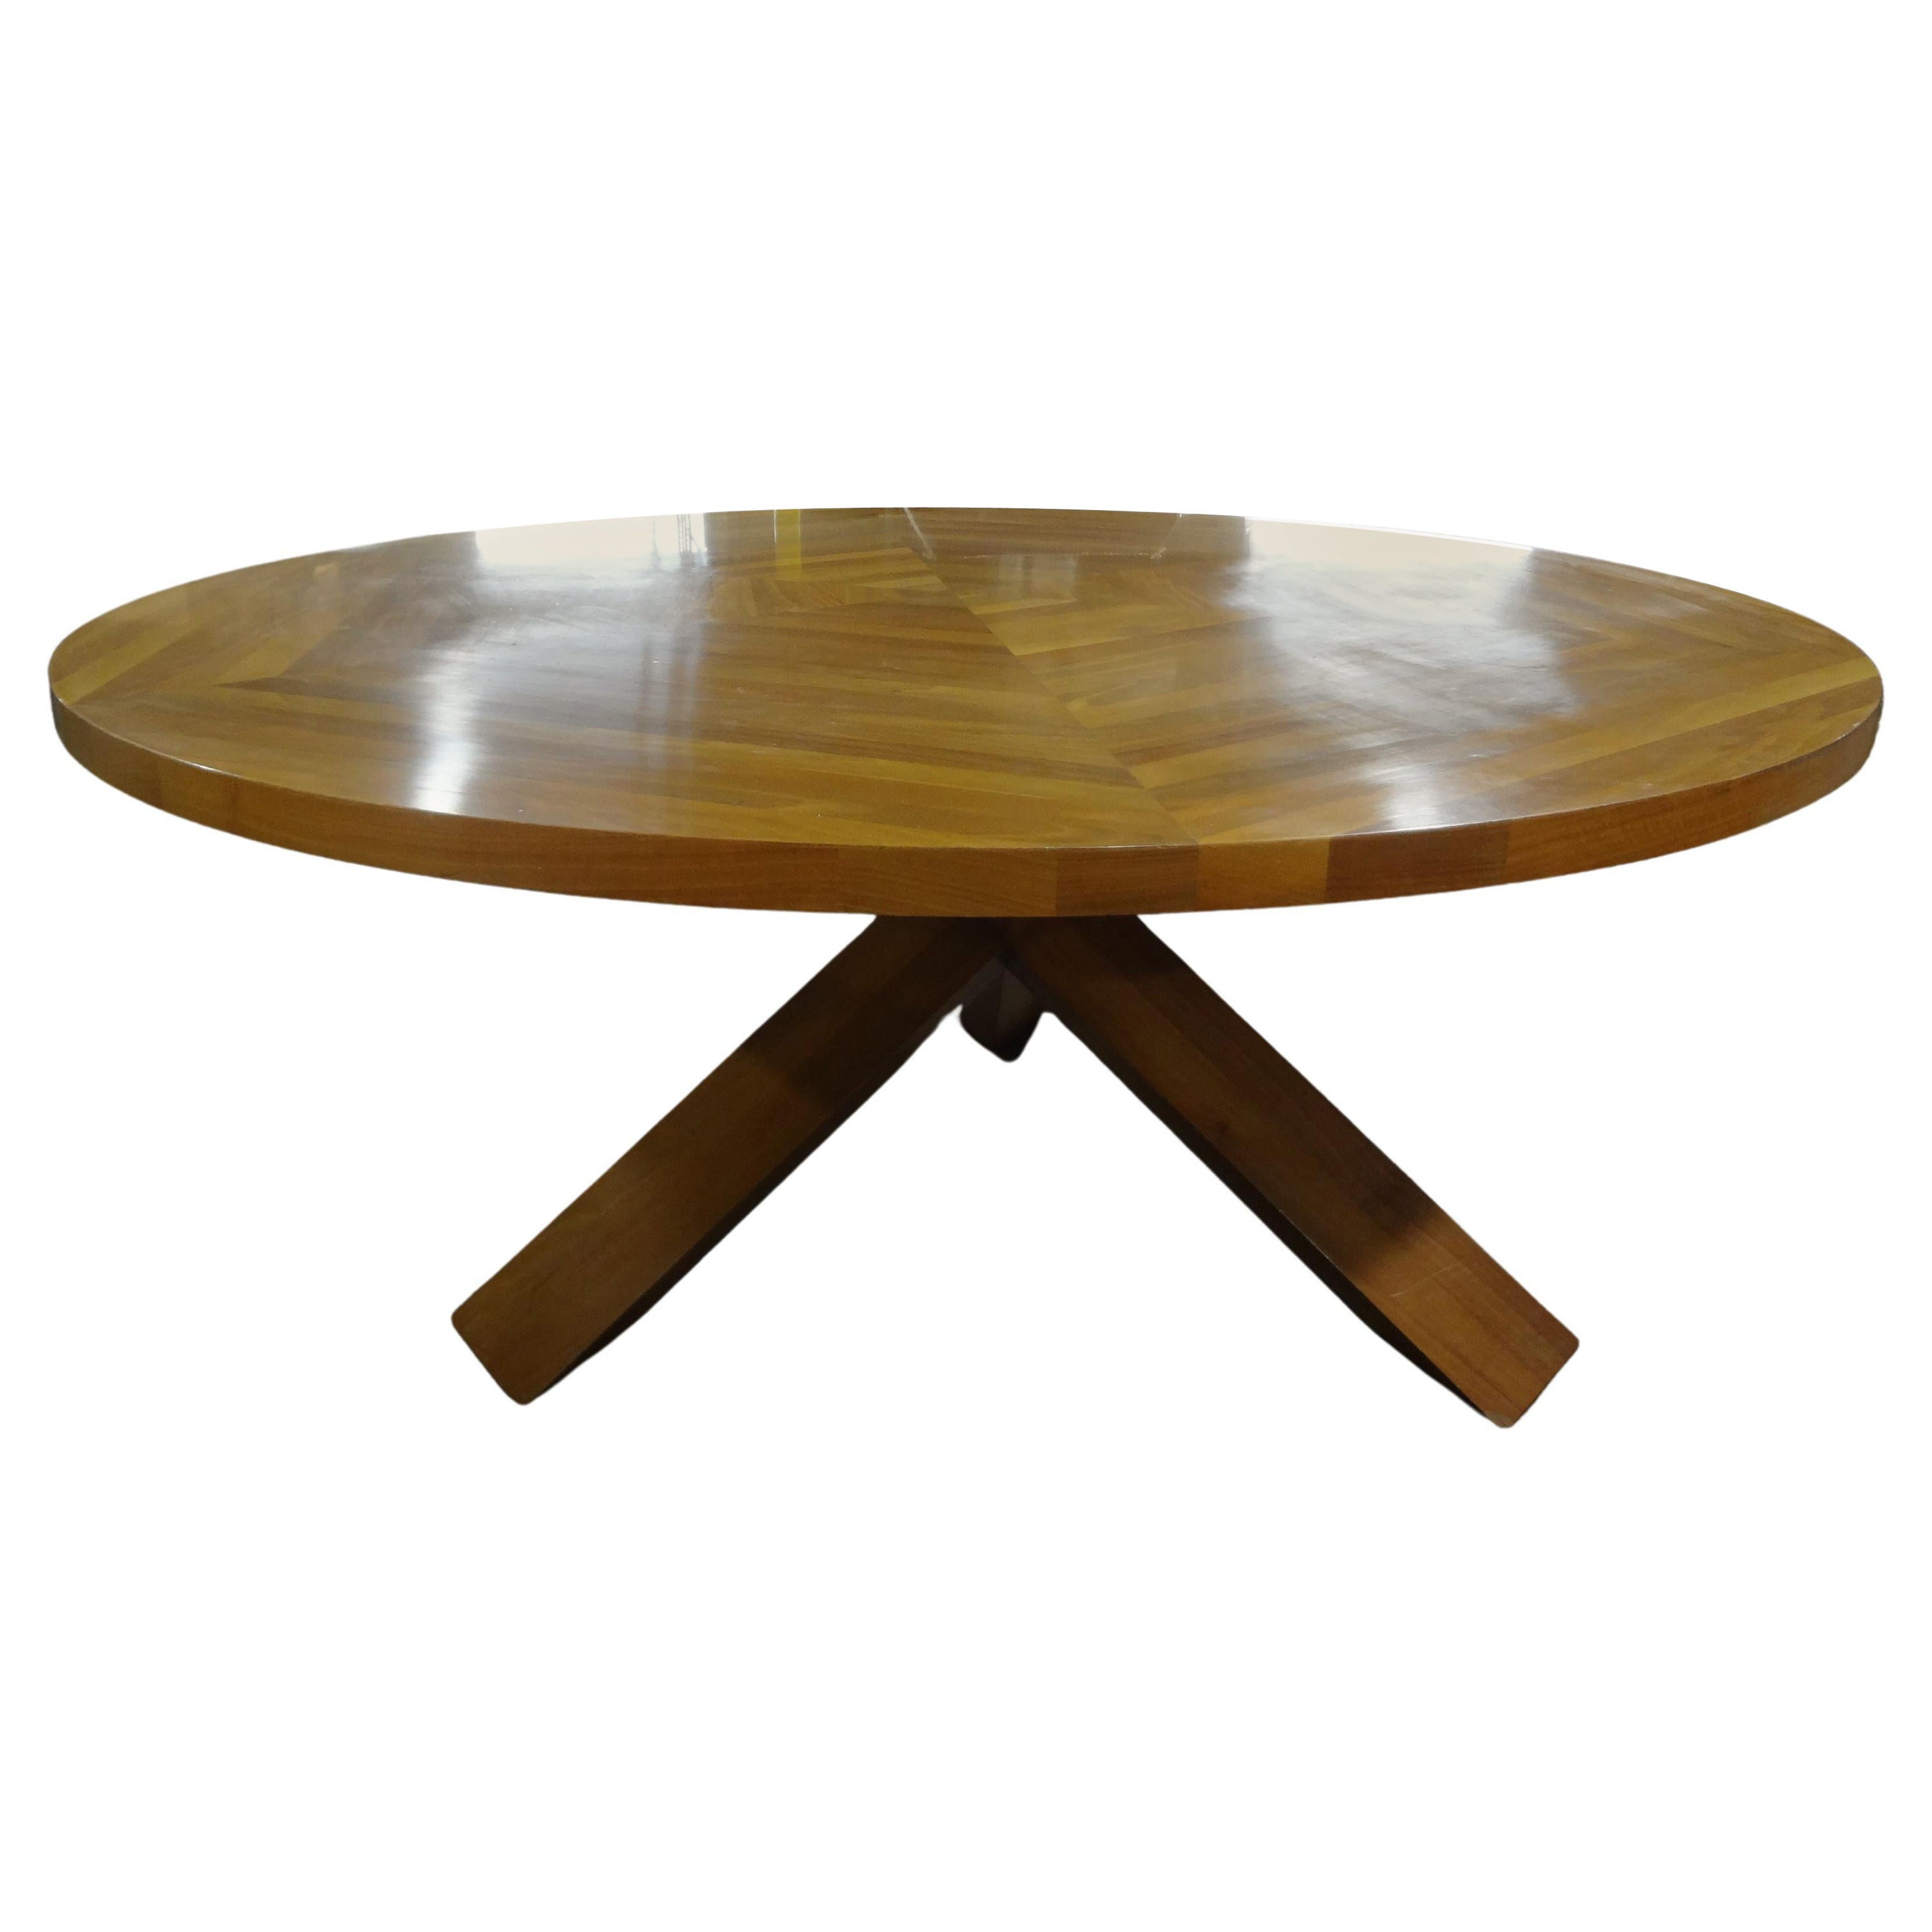 Italian Modern Tripod Center Table Or Dining Table By Cassina